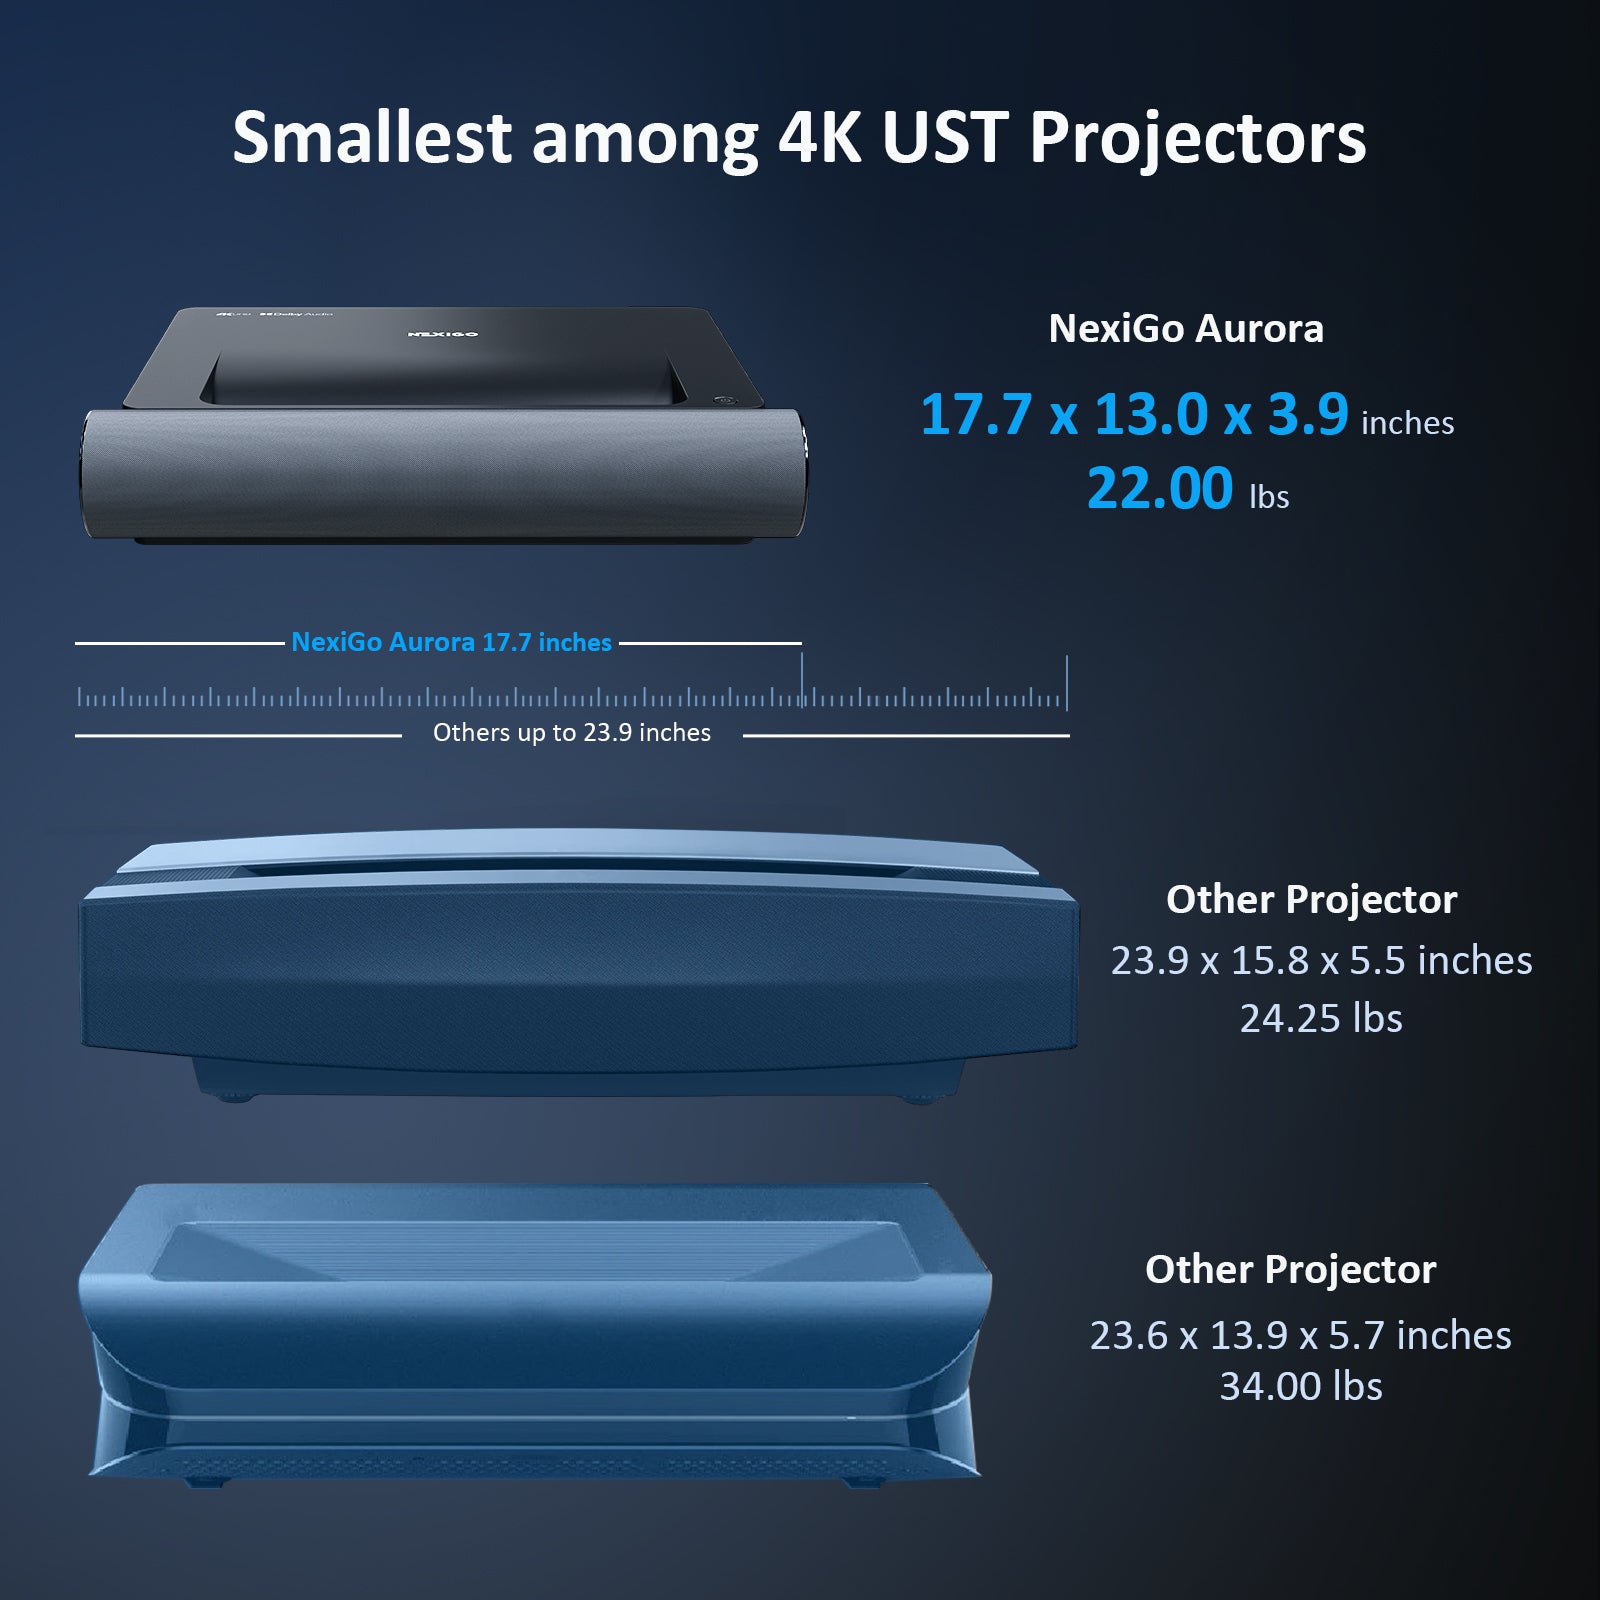 Compared to other UST projectors, NexiGo's projector is only 17.7'' long and weighs just 22lbs.